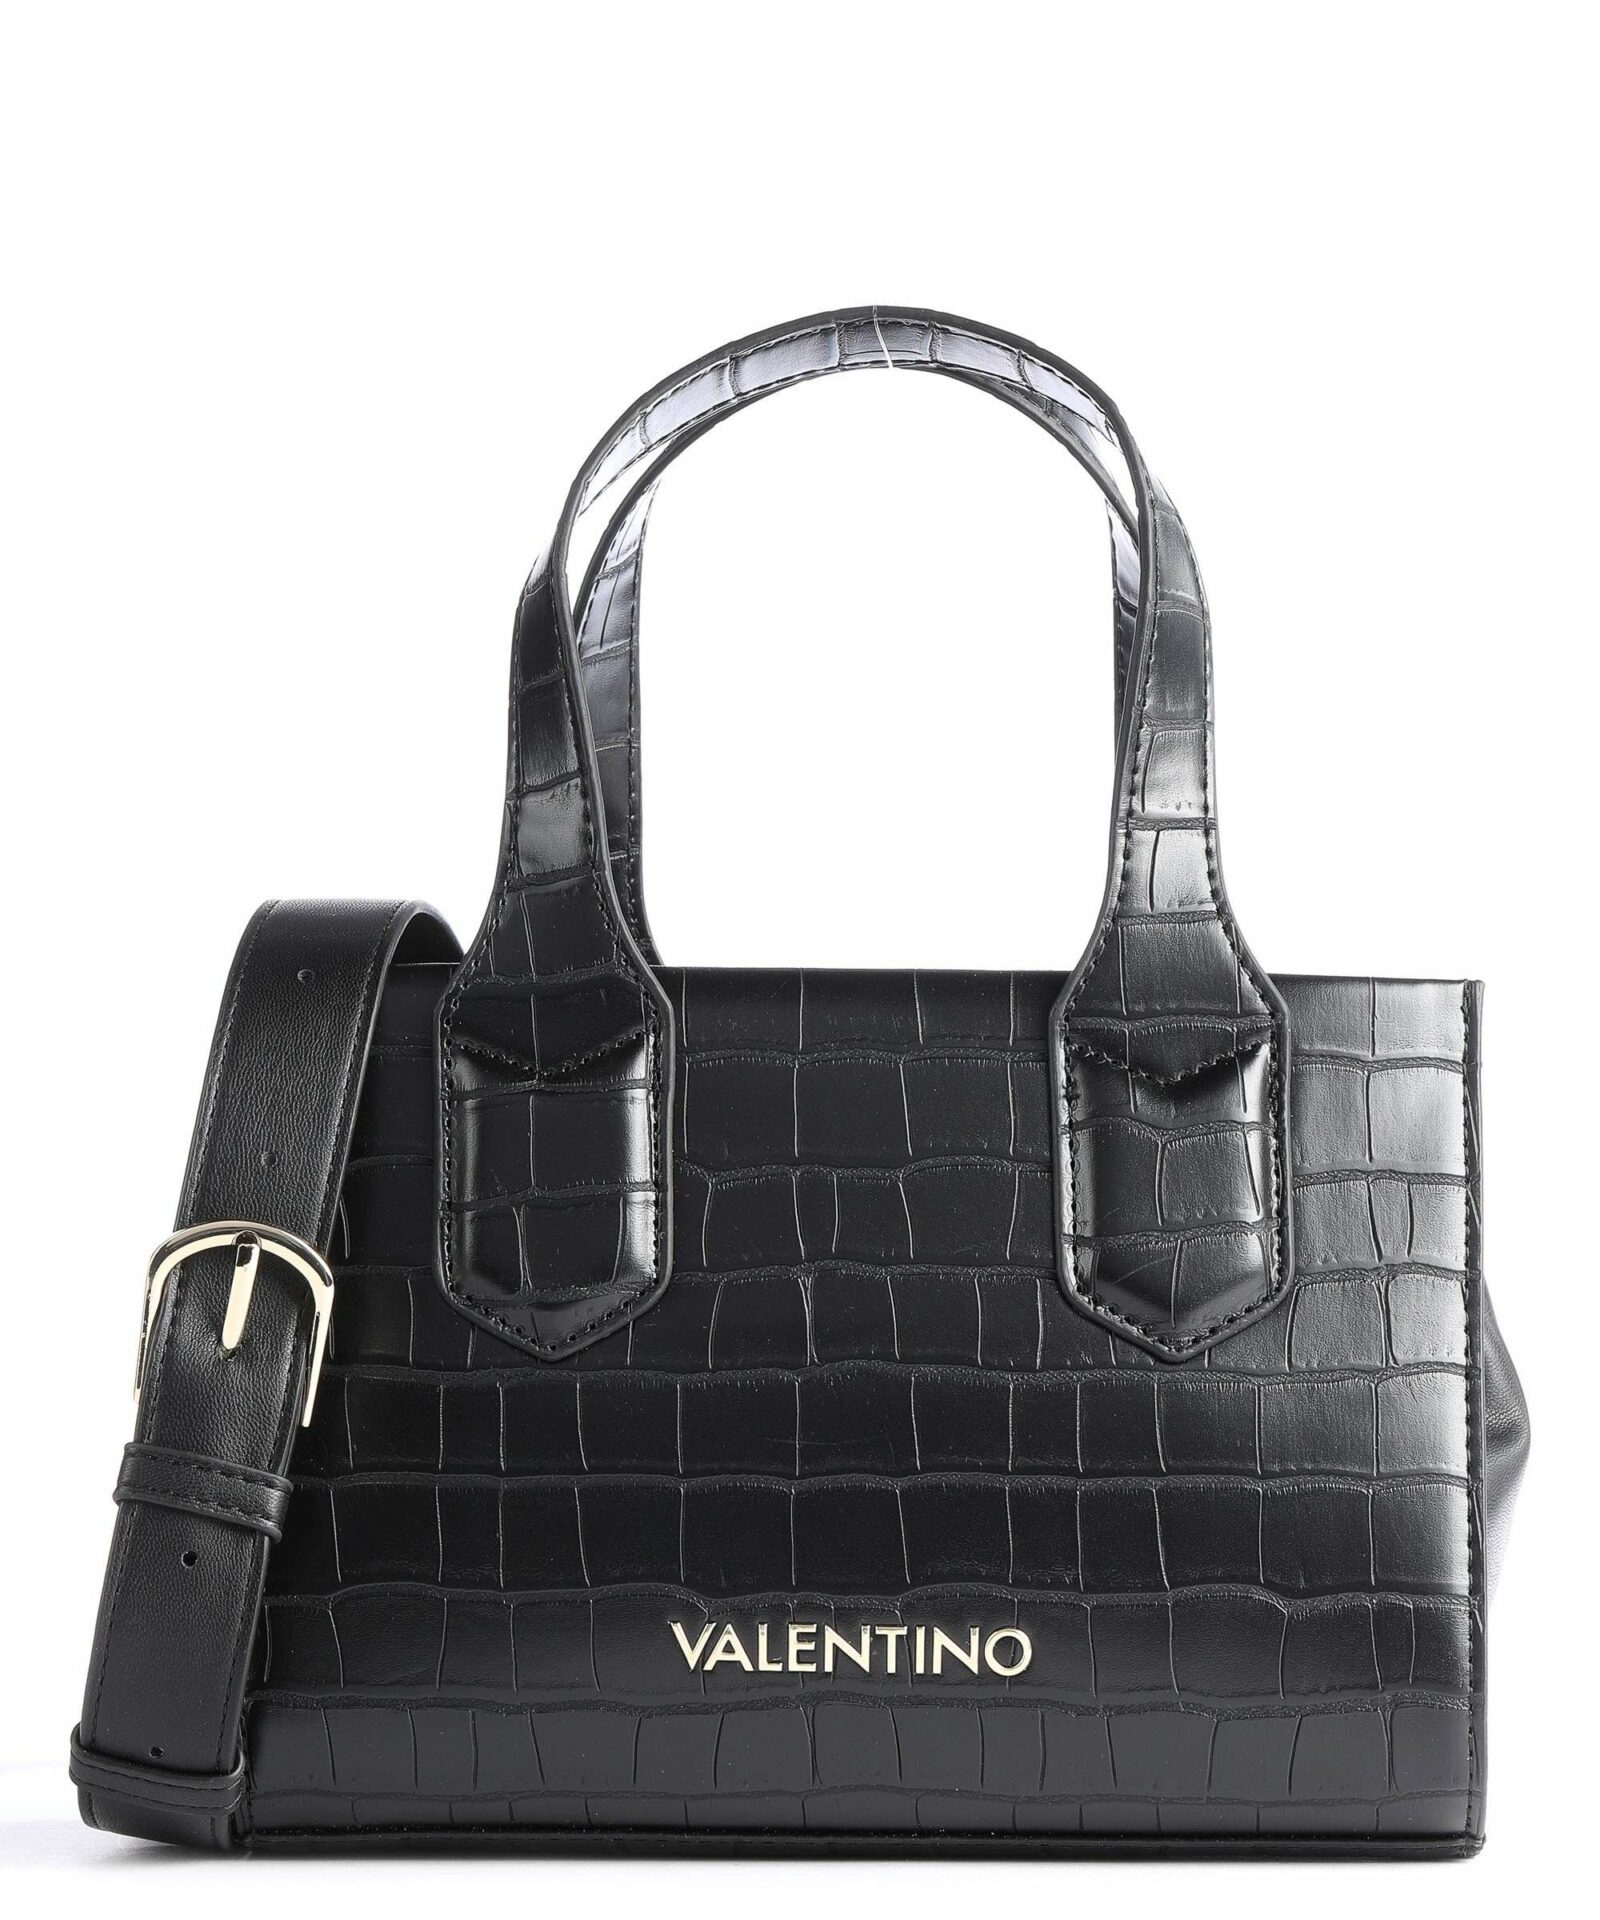 Valentino by Mario Valentino Backpack VBS6IQ08 grey - ESD Store